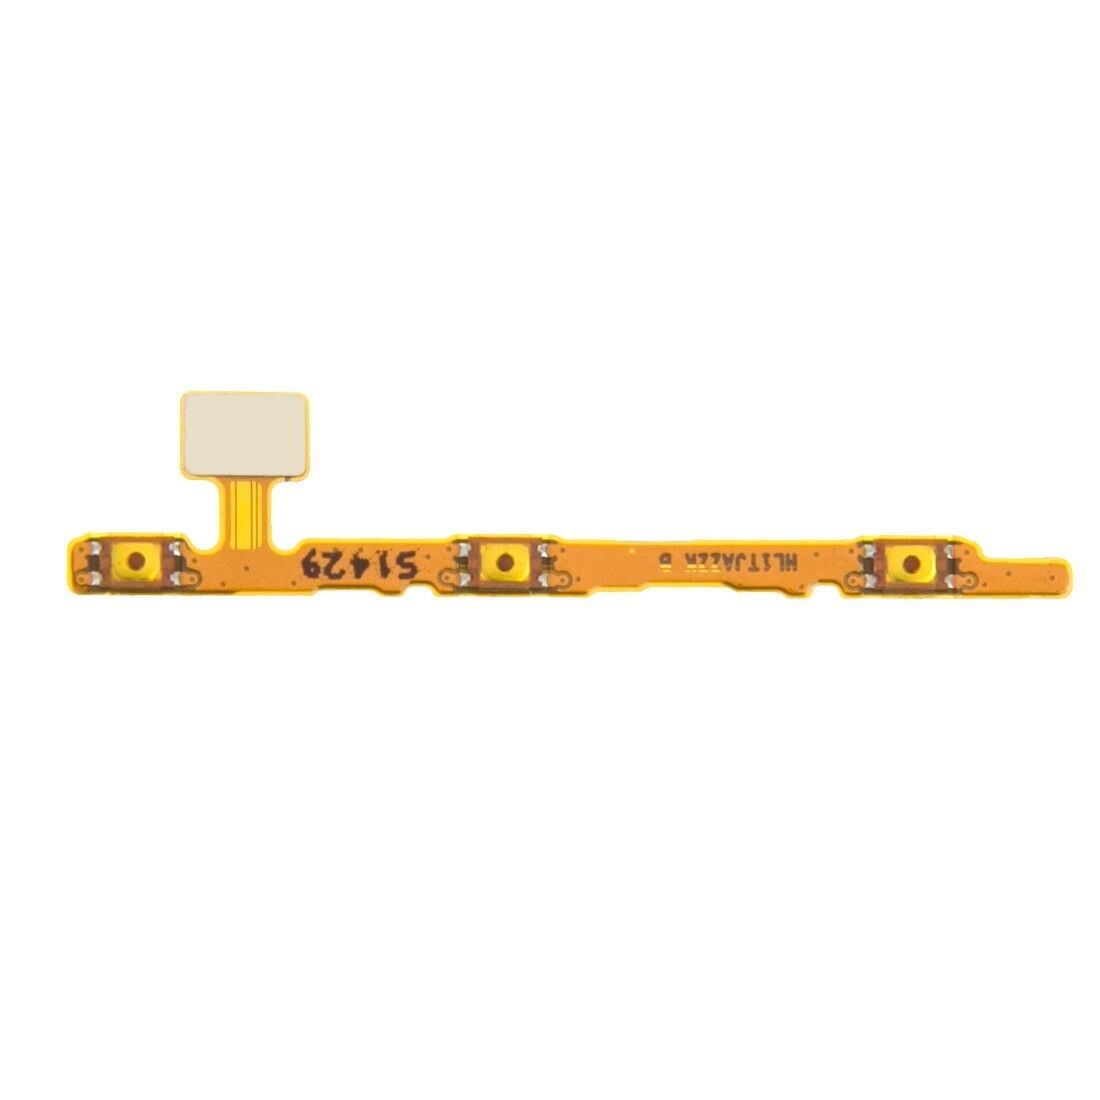 Huawei Ascend Mate 7 Replacement Volume & Power On/Off Buttons Flex Cable for [product_price] - First Help Tech